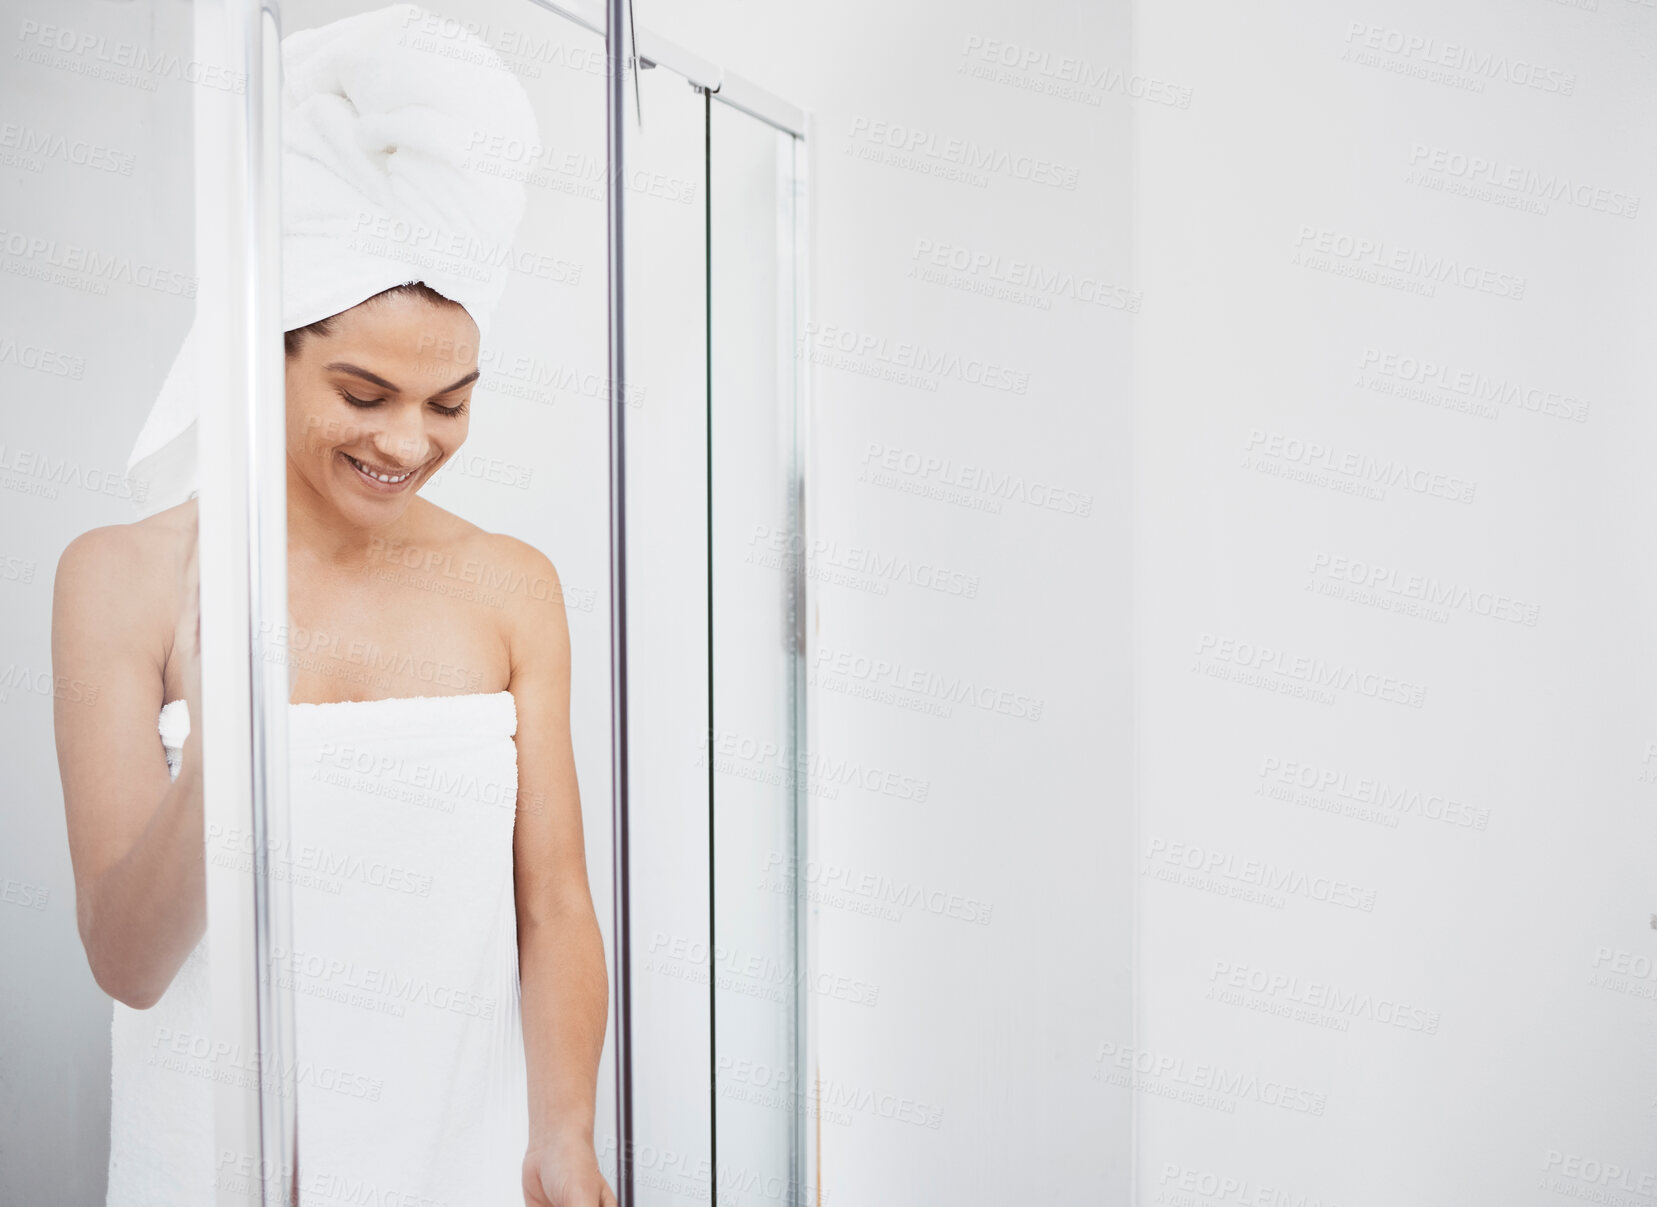 Buy stock photo Shot of a young woman getting out of a shower